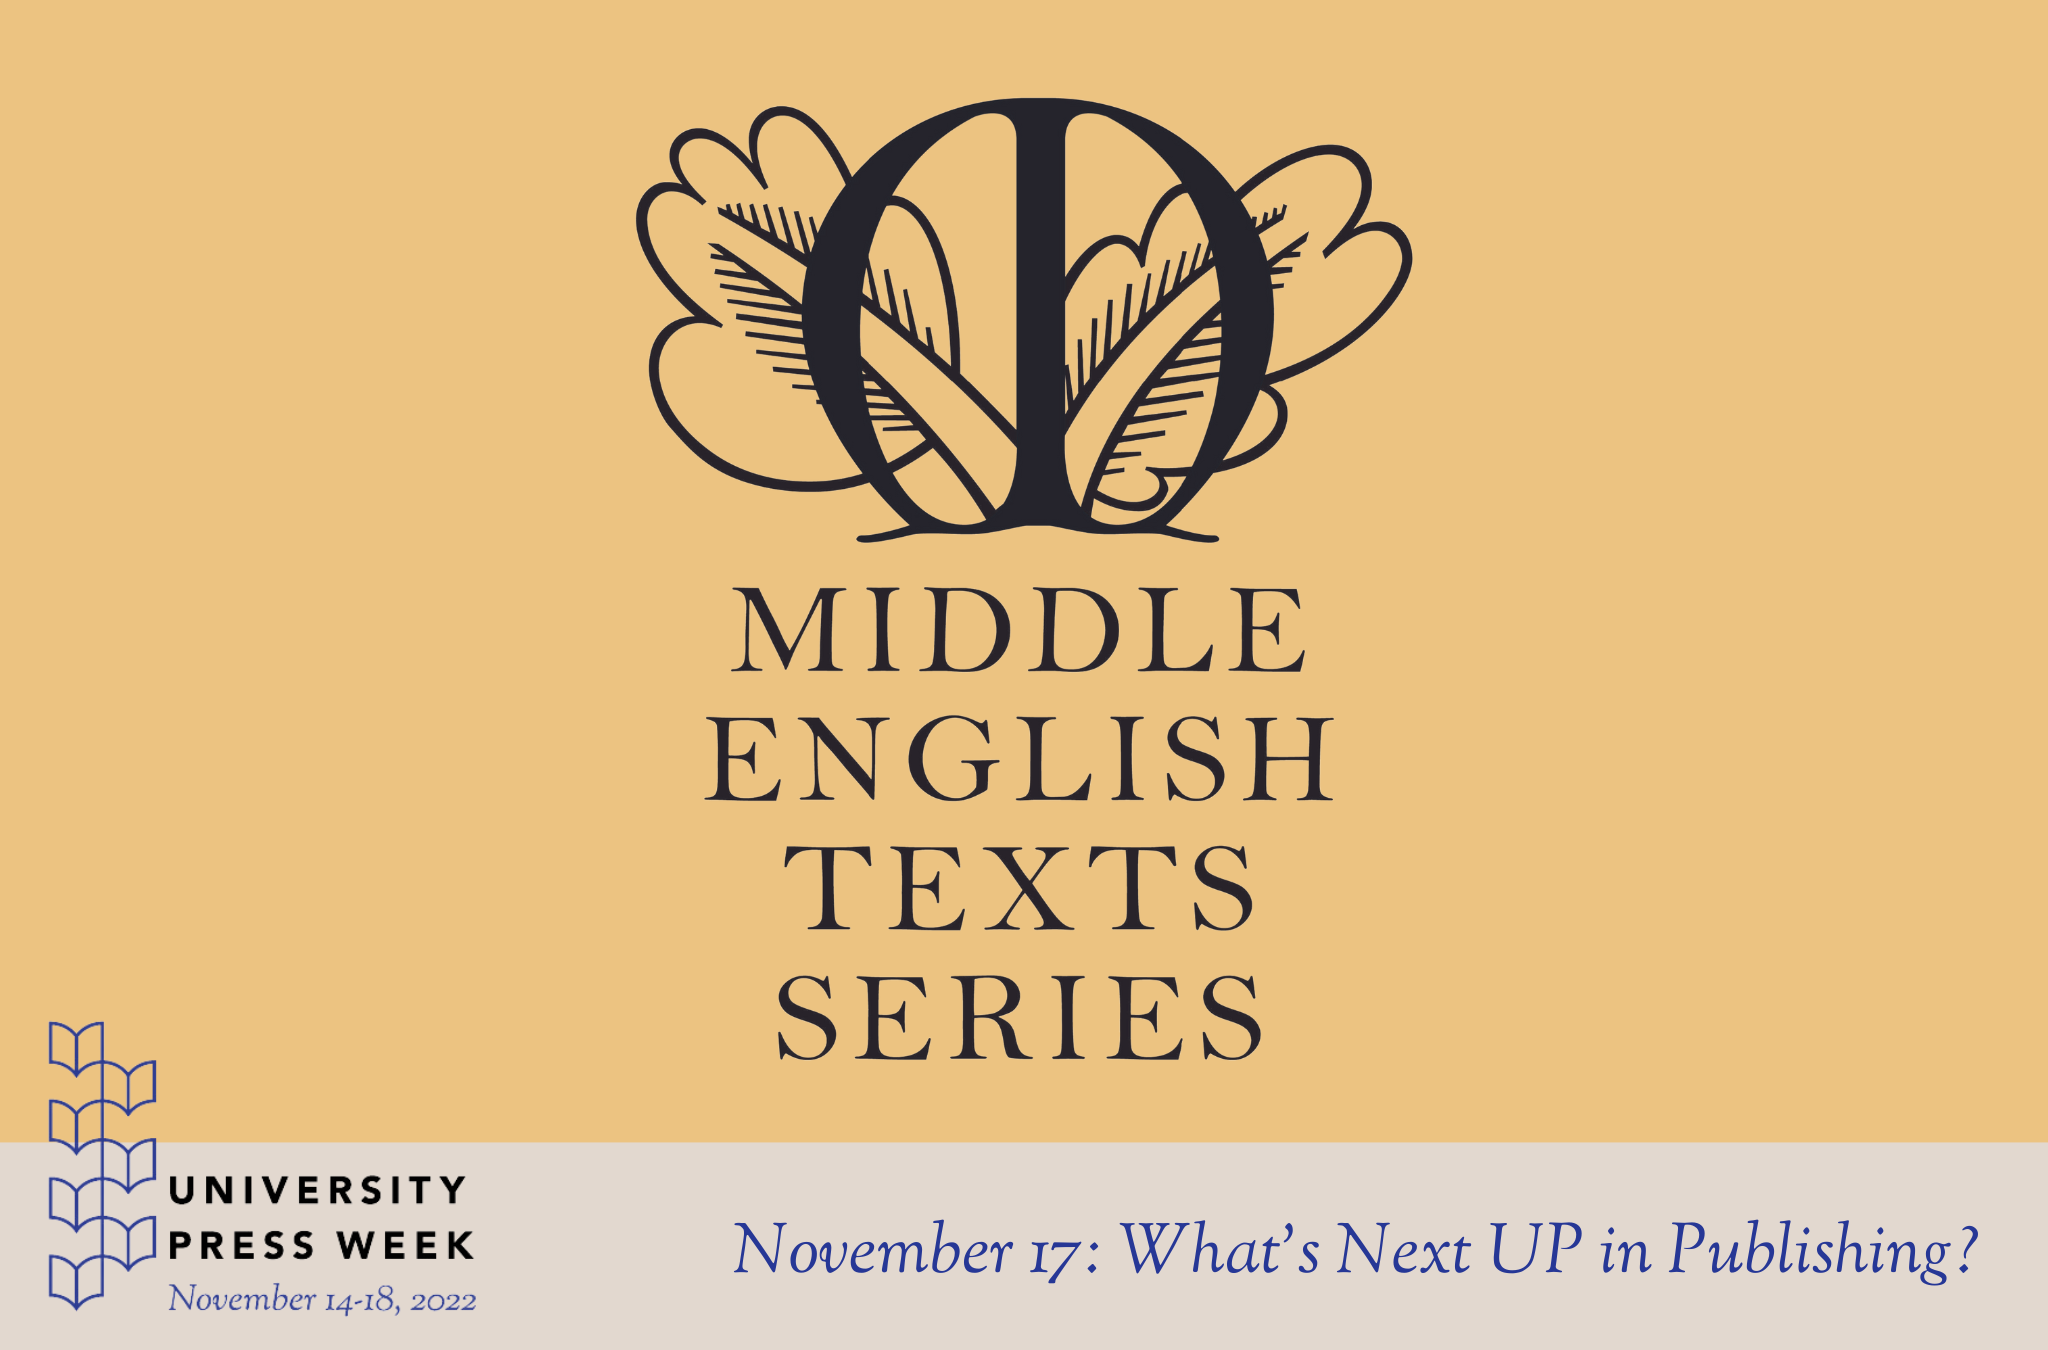 The METS logo and the words Middle English Texts Series above the University Presses week logo and the words "November 17: What's Next UP in Publishing?"